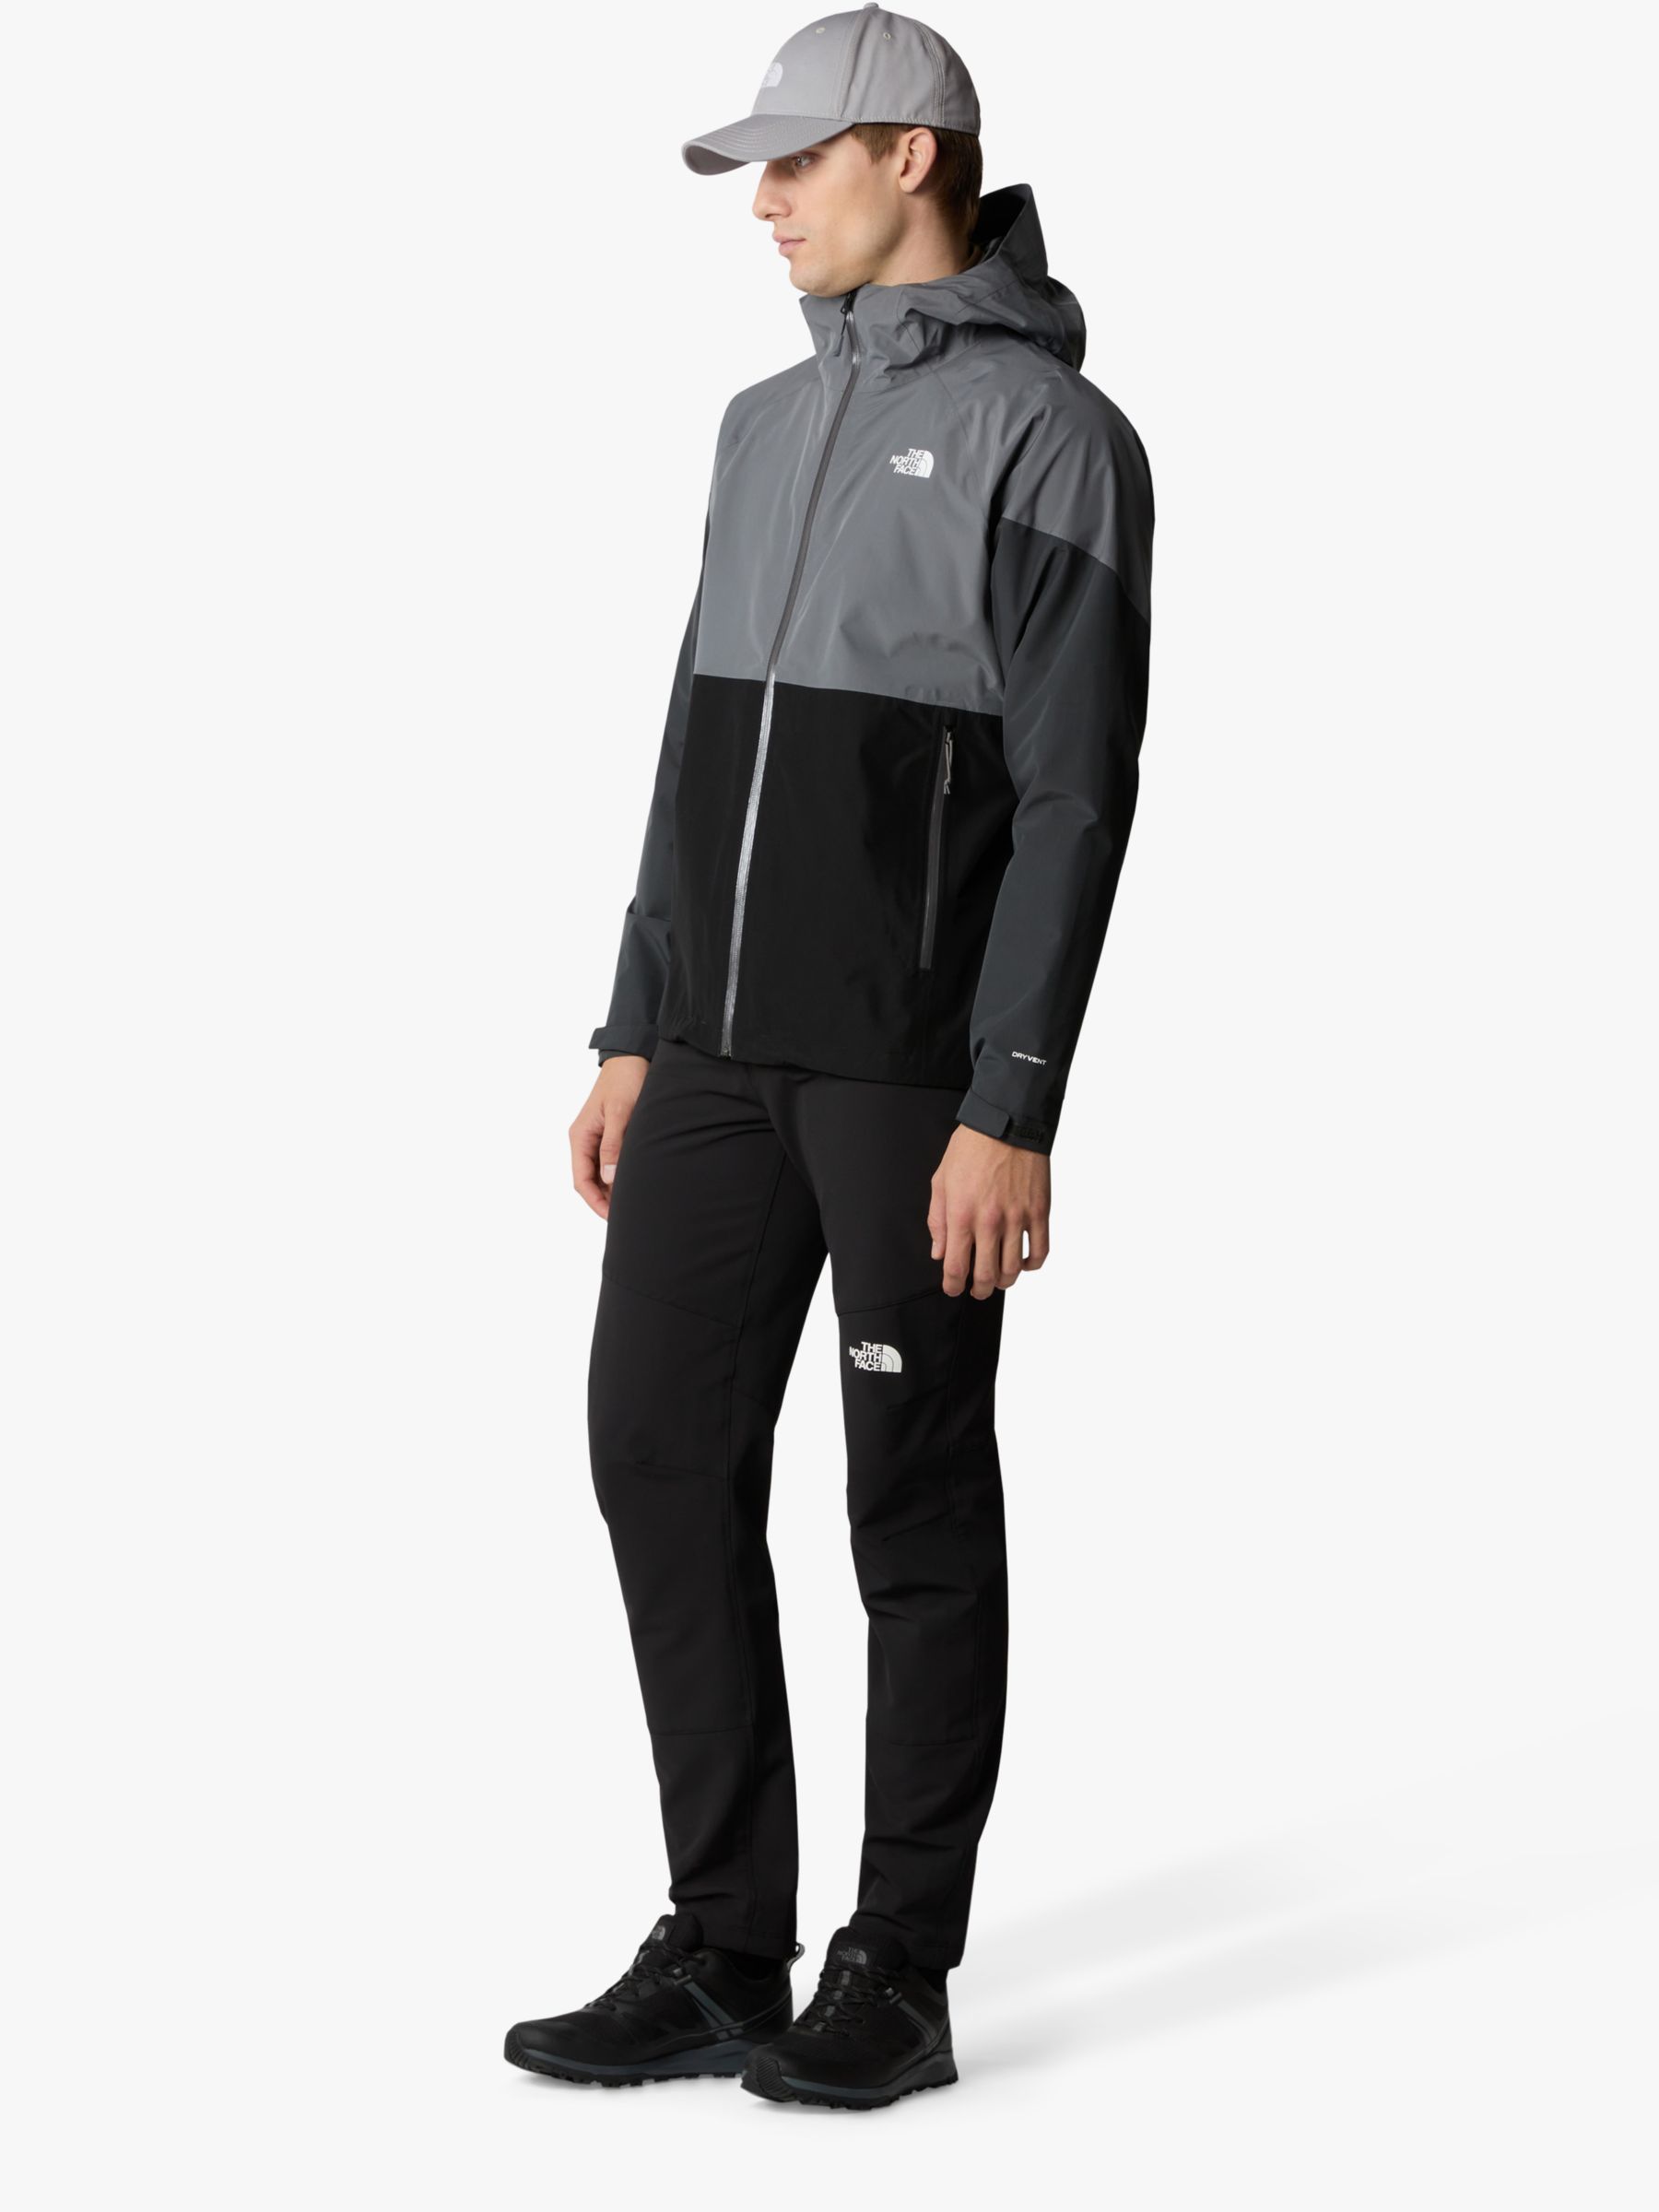 The North Face Lightning Zip-In Jacket, Black/Smoked Pearl, XL